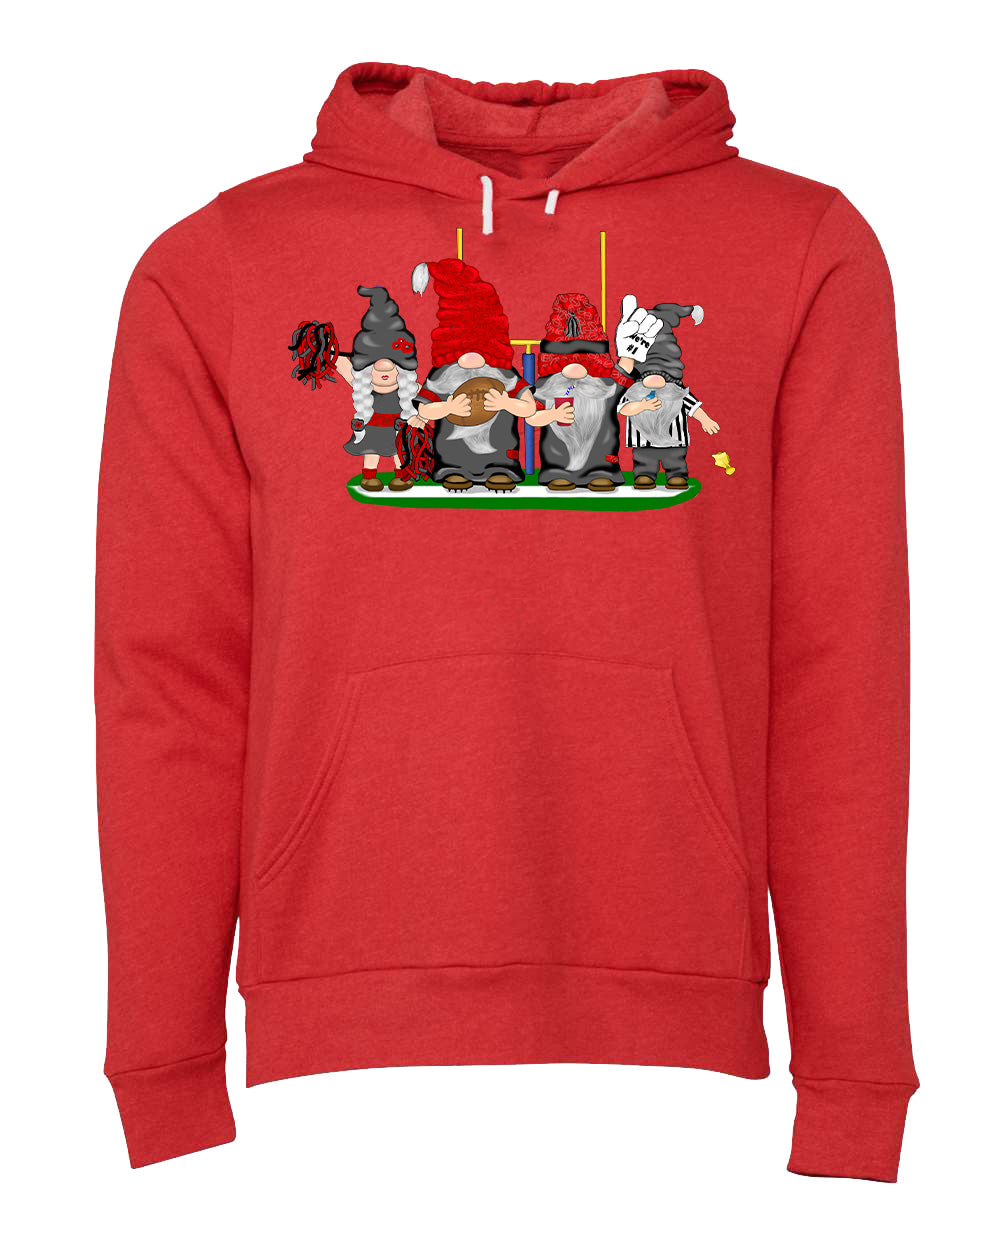 Black & Red Football Gnomes (similar to Tampa Bay) on Unisex Hoodie